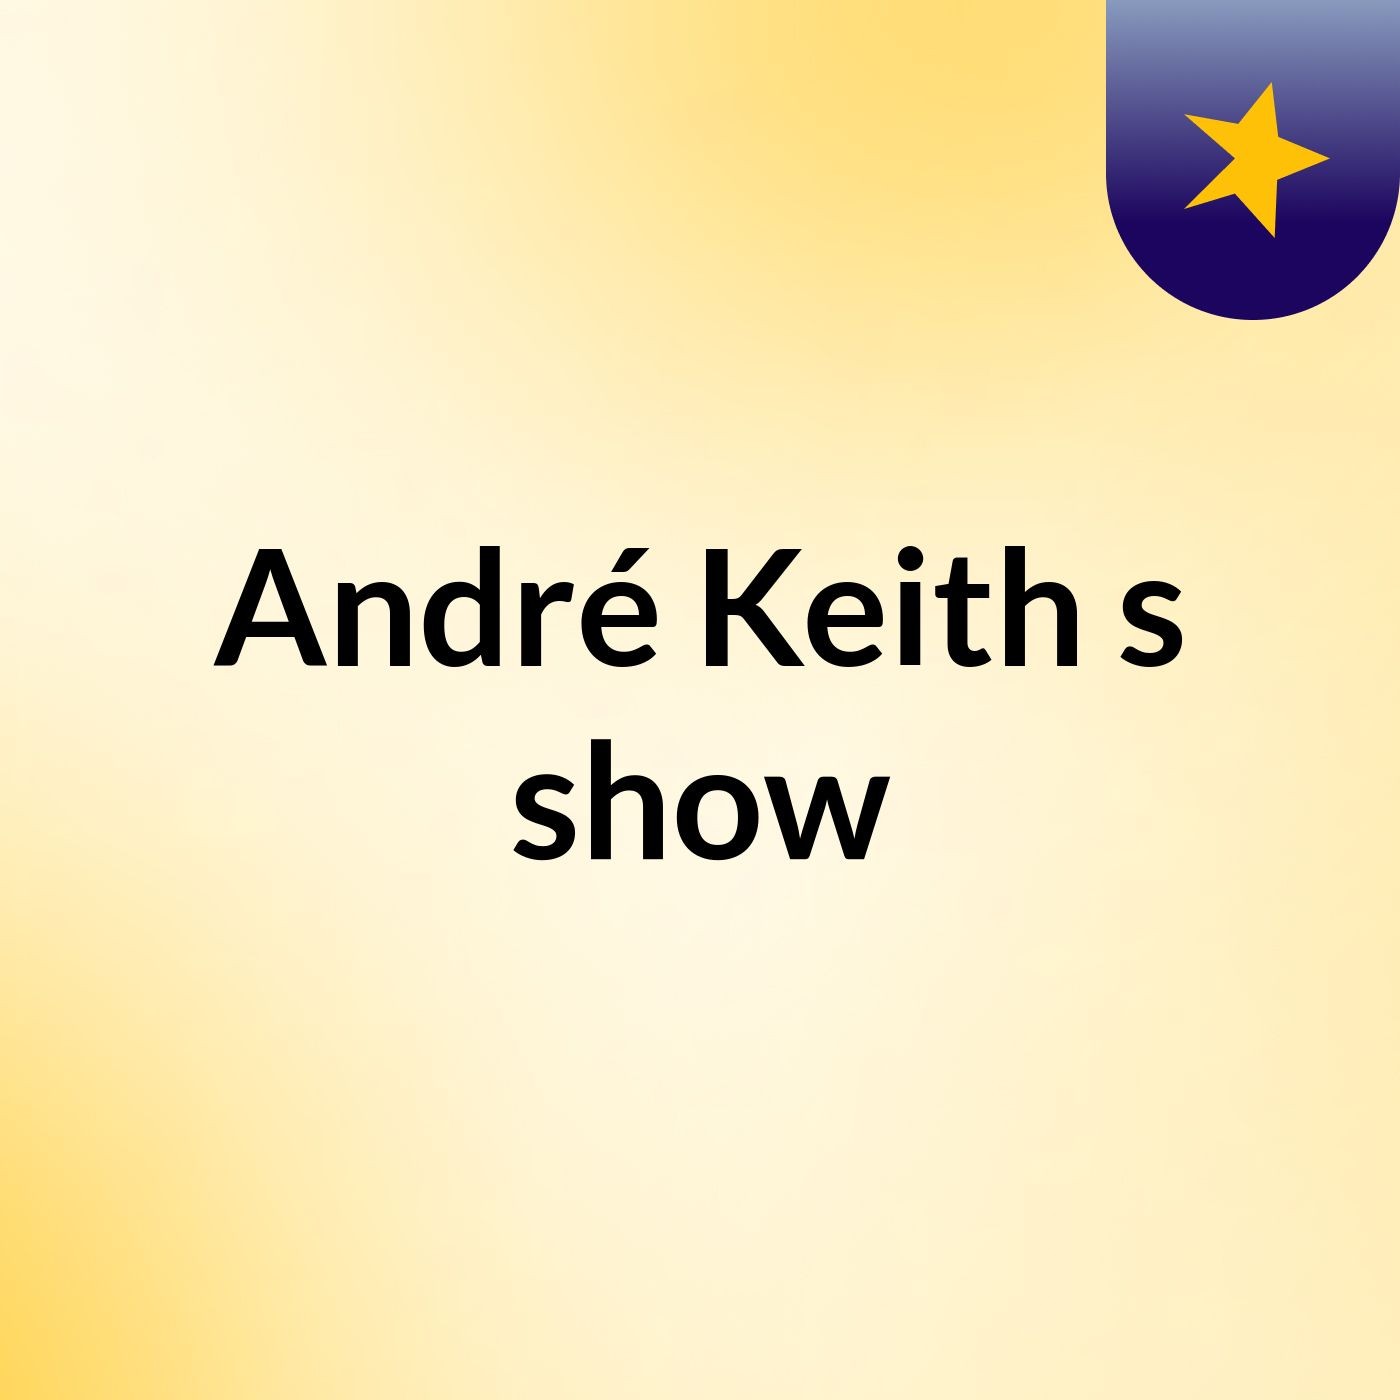 André Keith's show